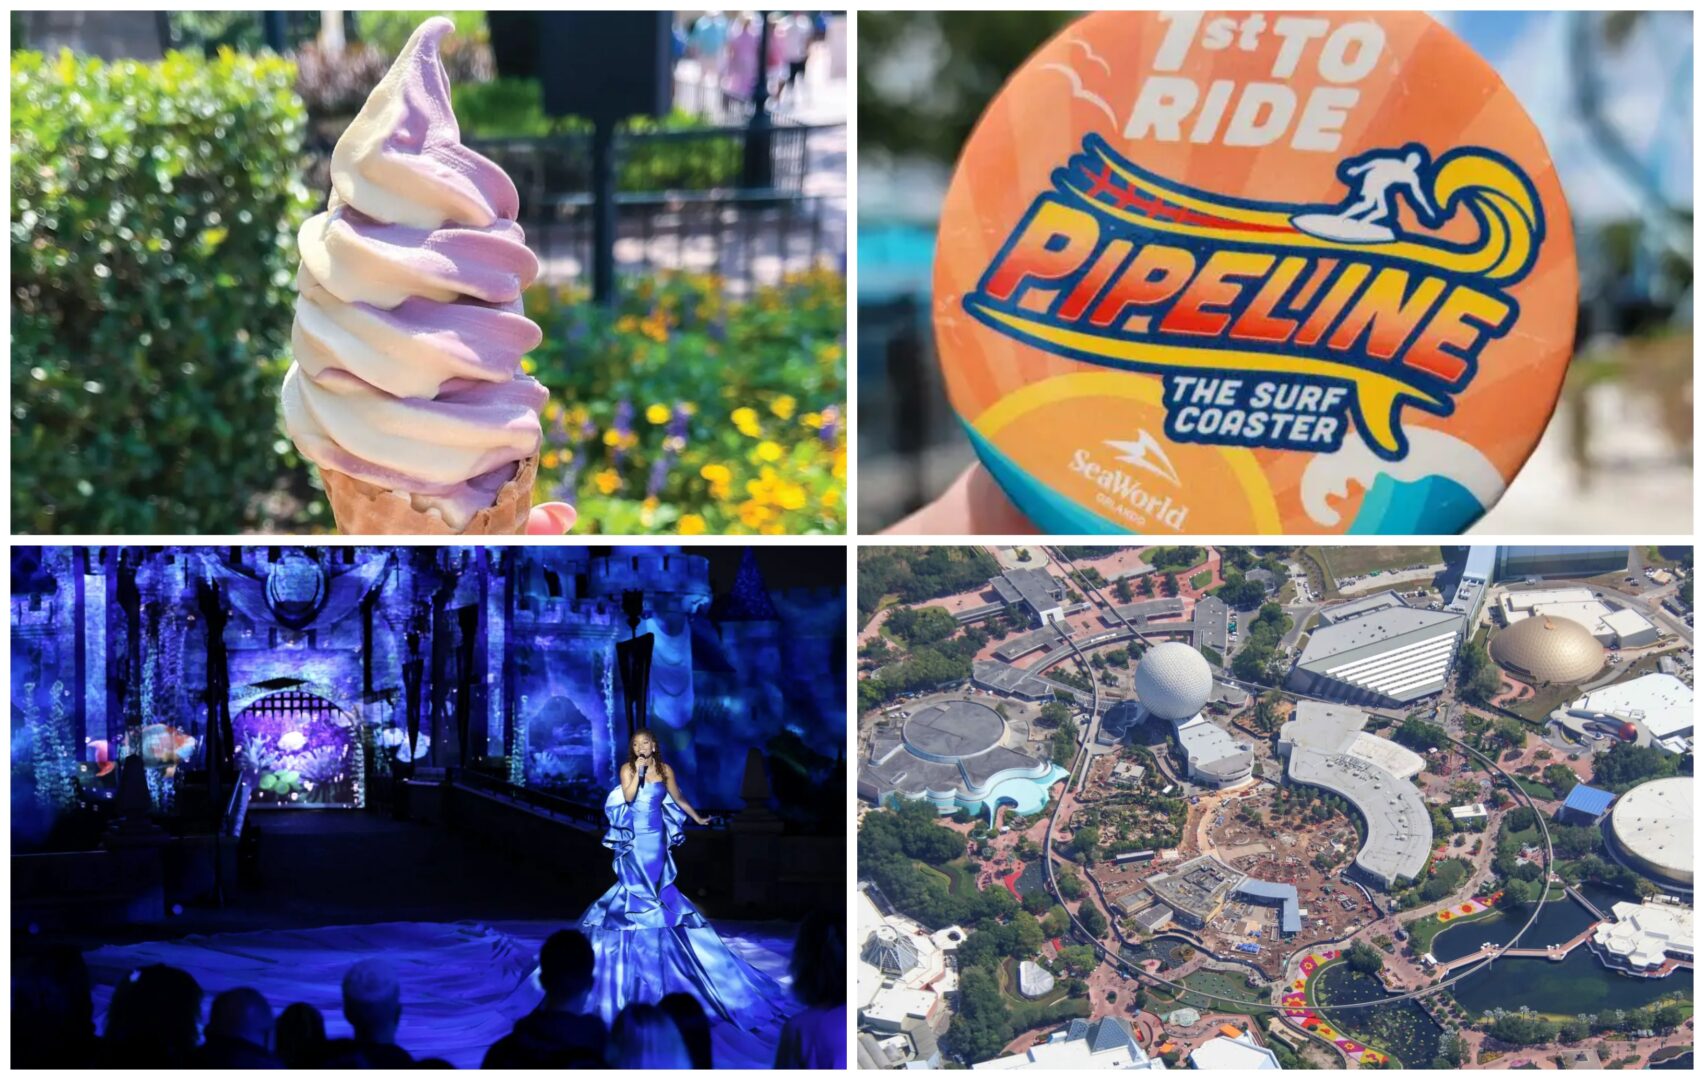 Disney News Highlights: PB&J Soft Serve in EPCOT, New Seaworld Coaster Pipeline: The Surf Coaster, Foals Born at Tri-Circle-D Ranch, Halle Bailey Crushes it at Disneyland